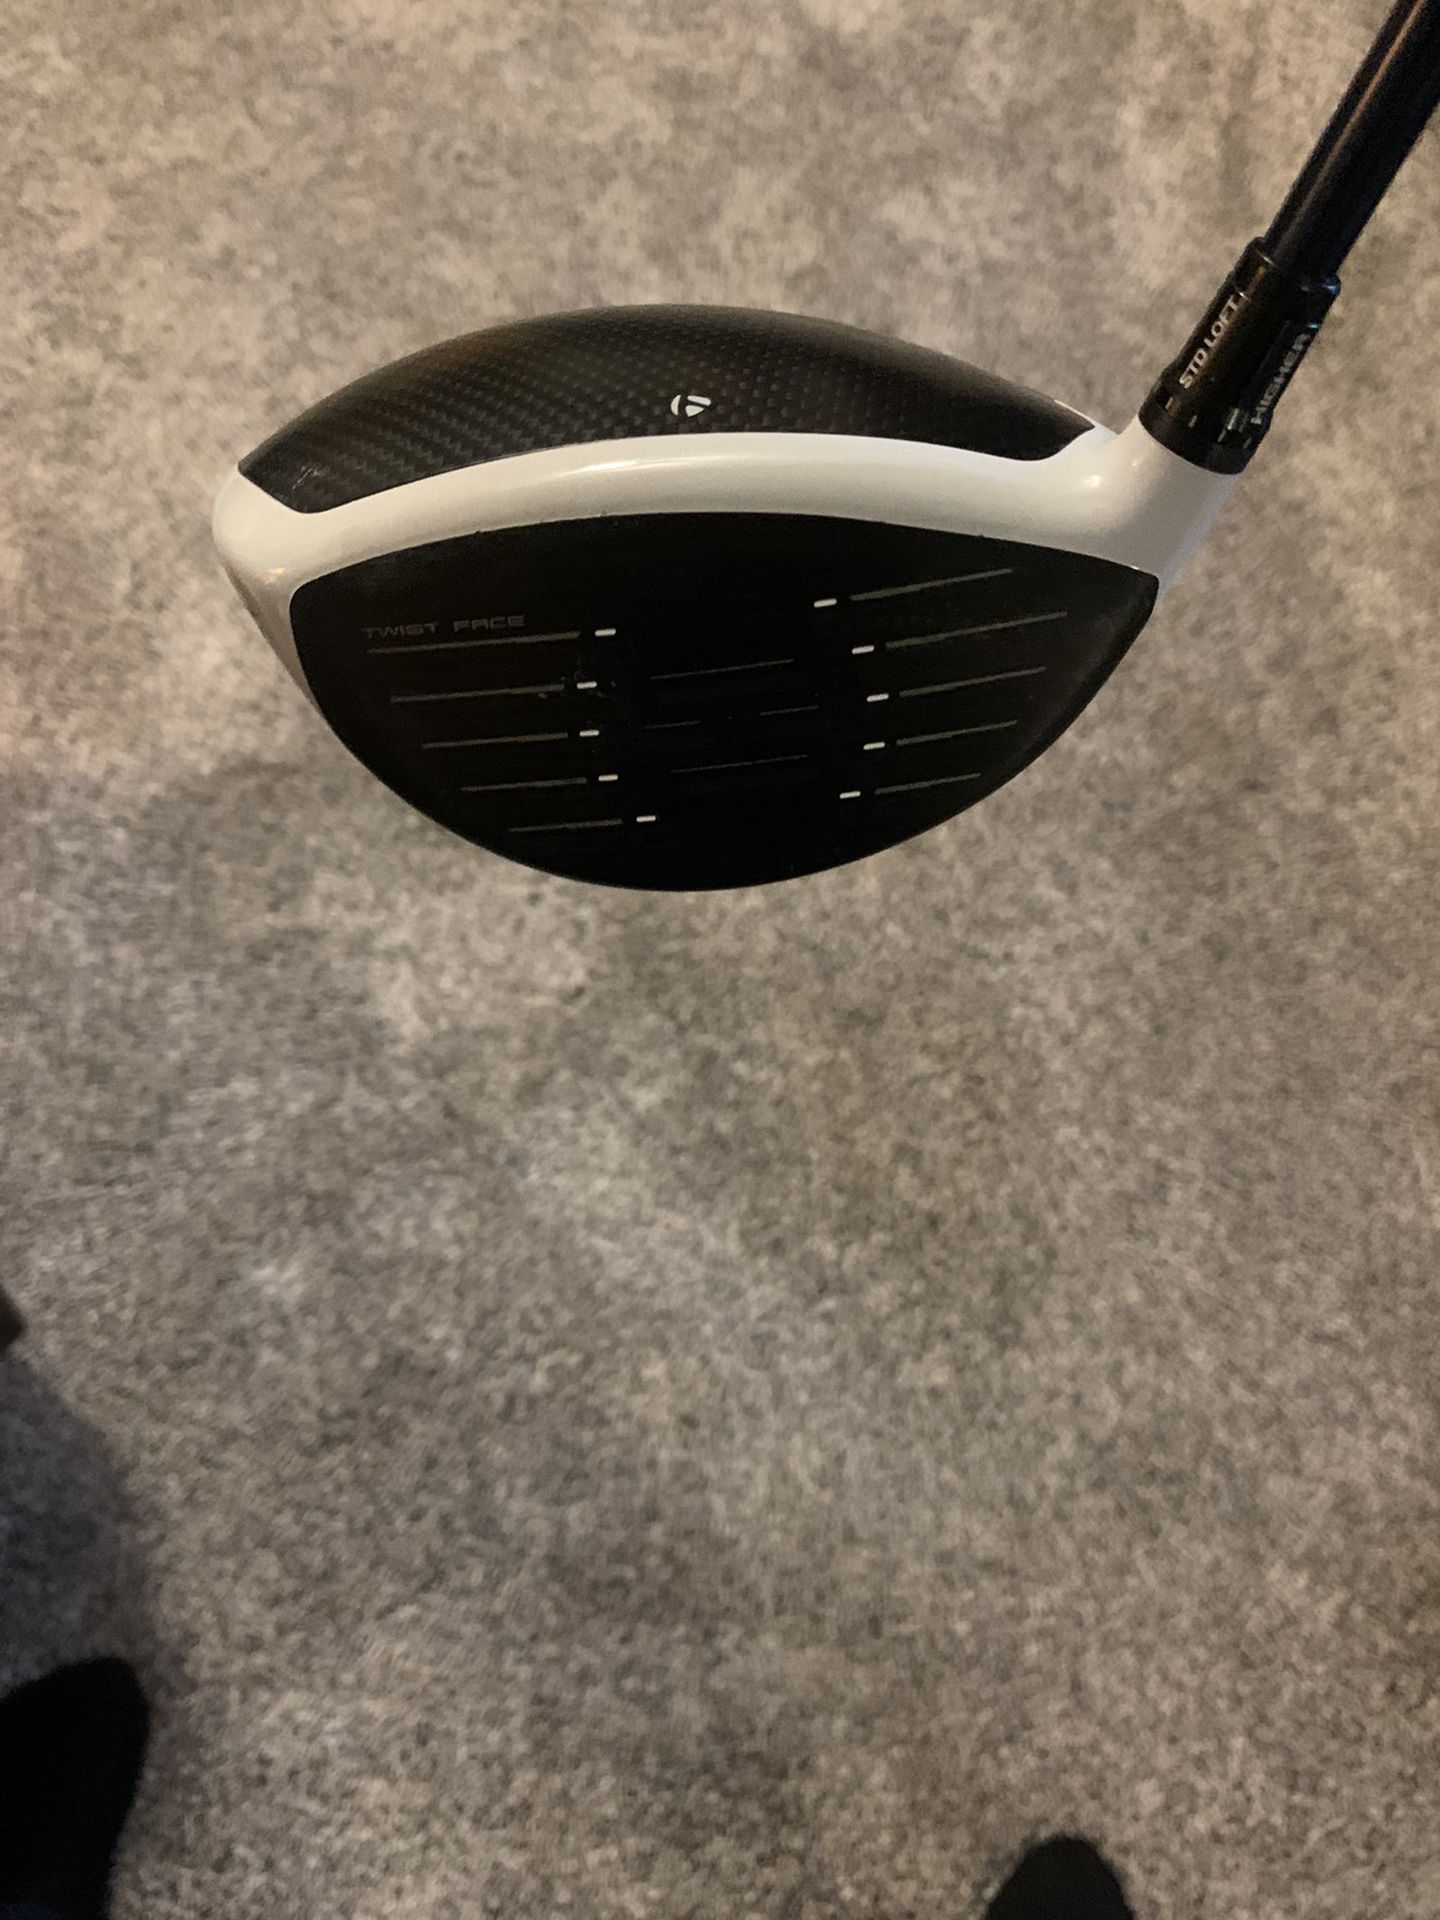 Taylormade Sims 2 Driver +  Sims 5 Wood Complete Set 4.h, 5h, 6-Aw + Hi-Toe 58* Sw + odyssey putter